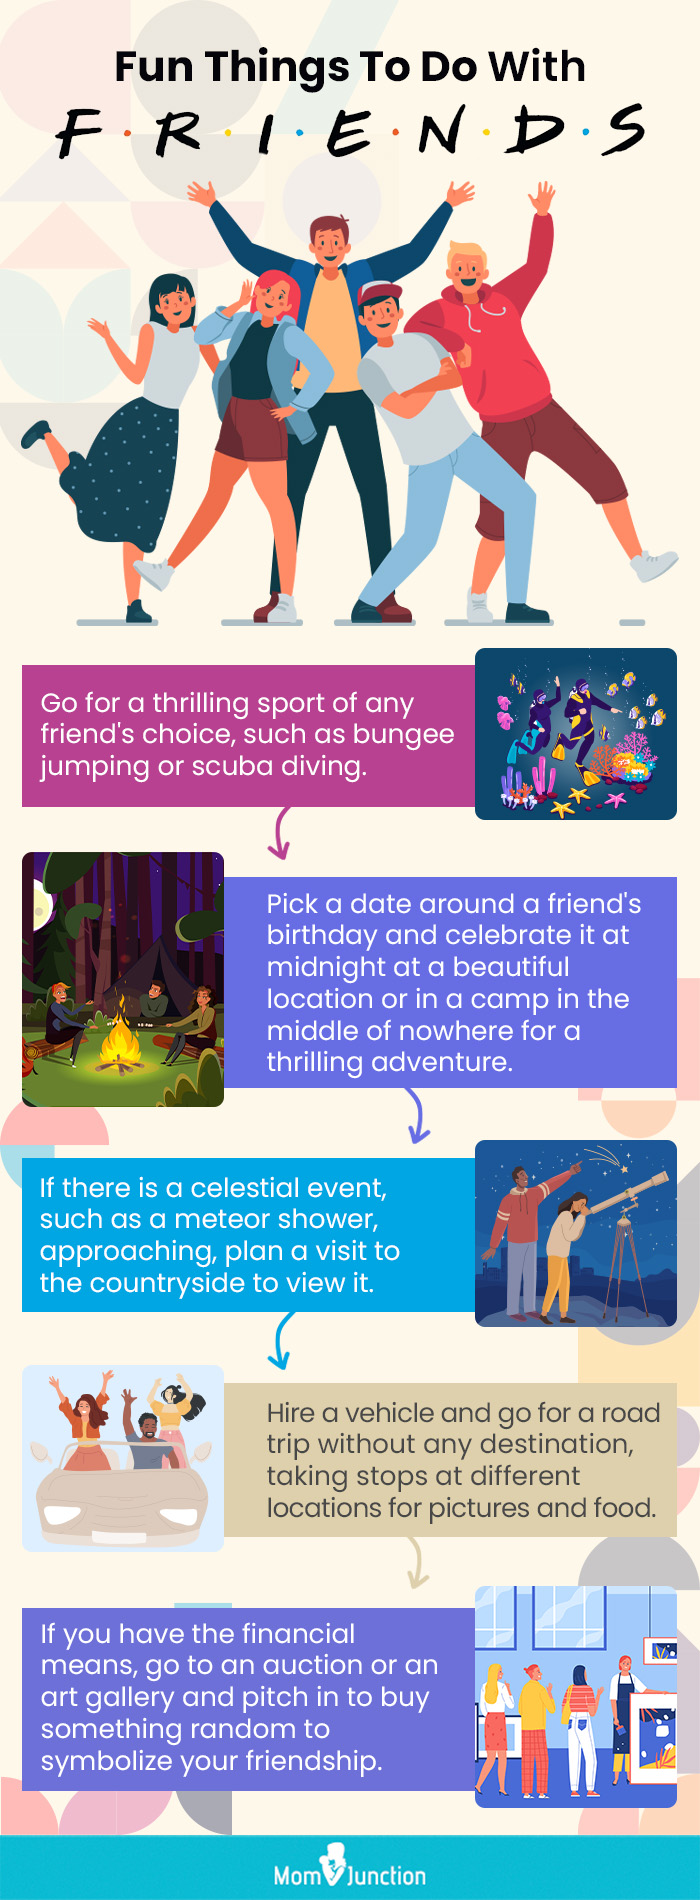 Fun things to do with friends [infographic]